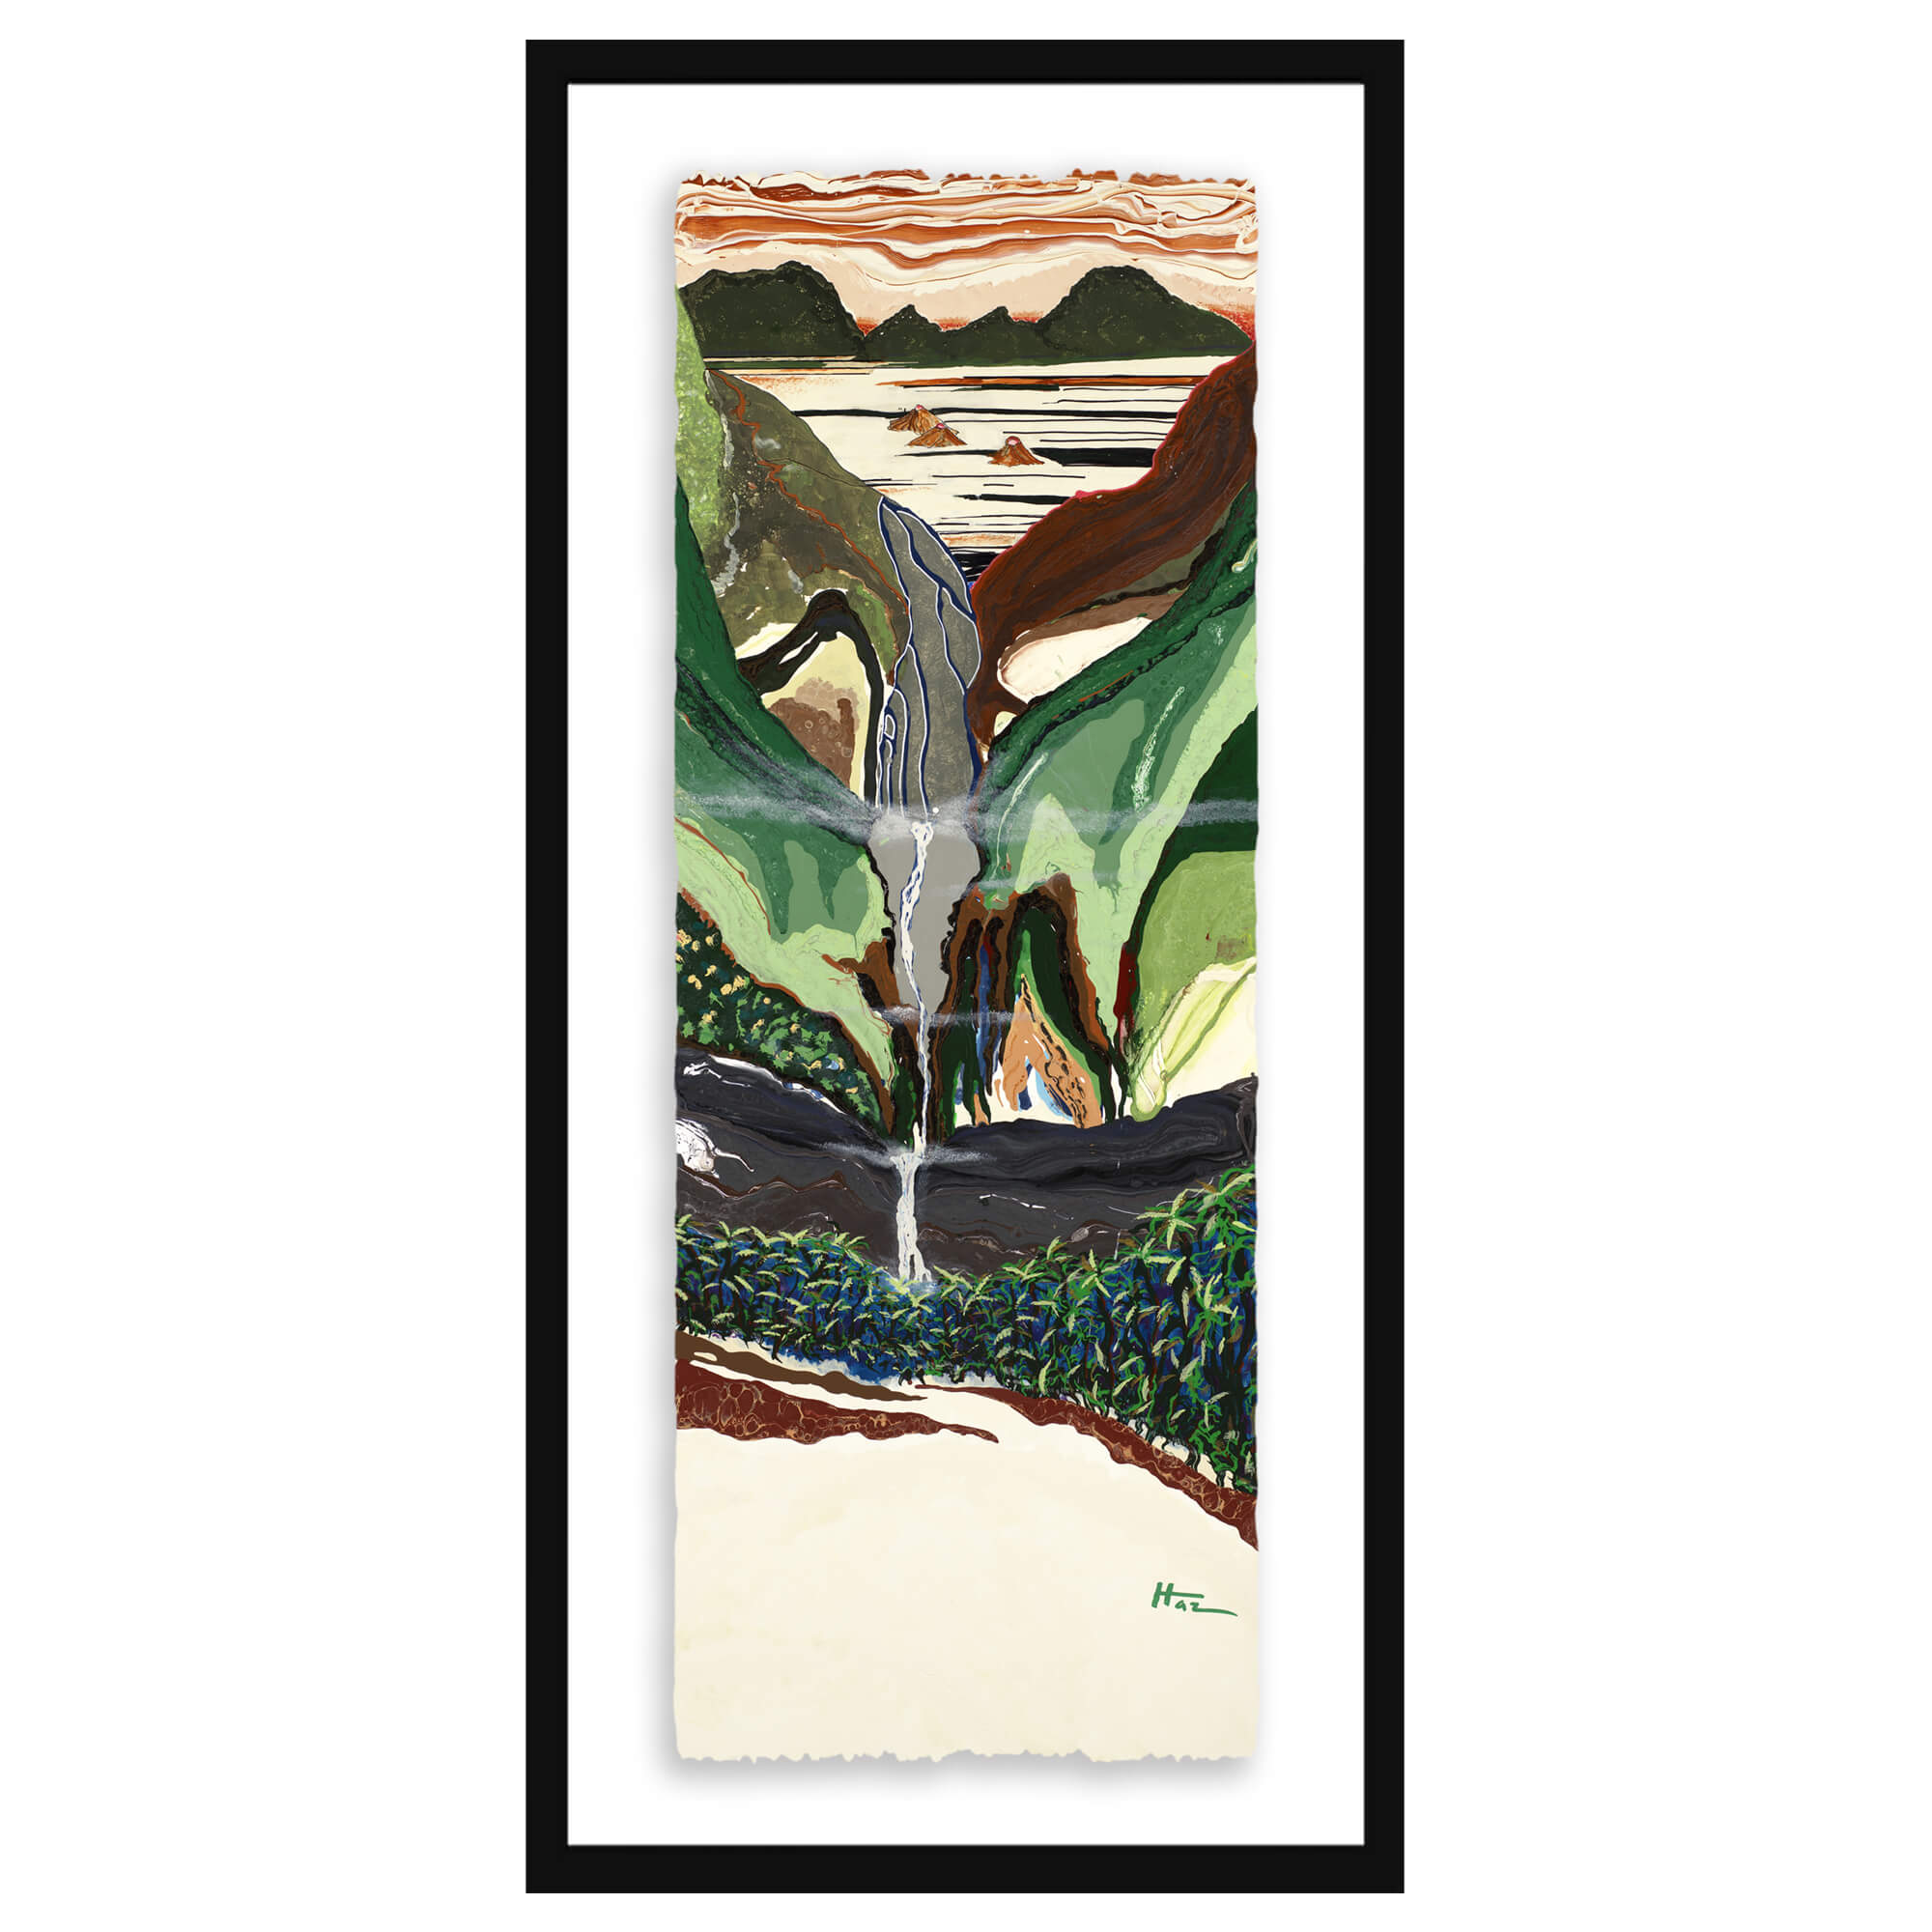 Paper art print with black frame  featuring the towering mountain in the background by hawaii artist robert hazzard